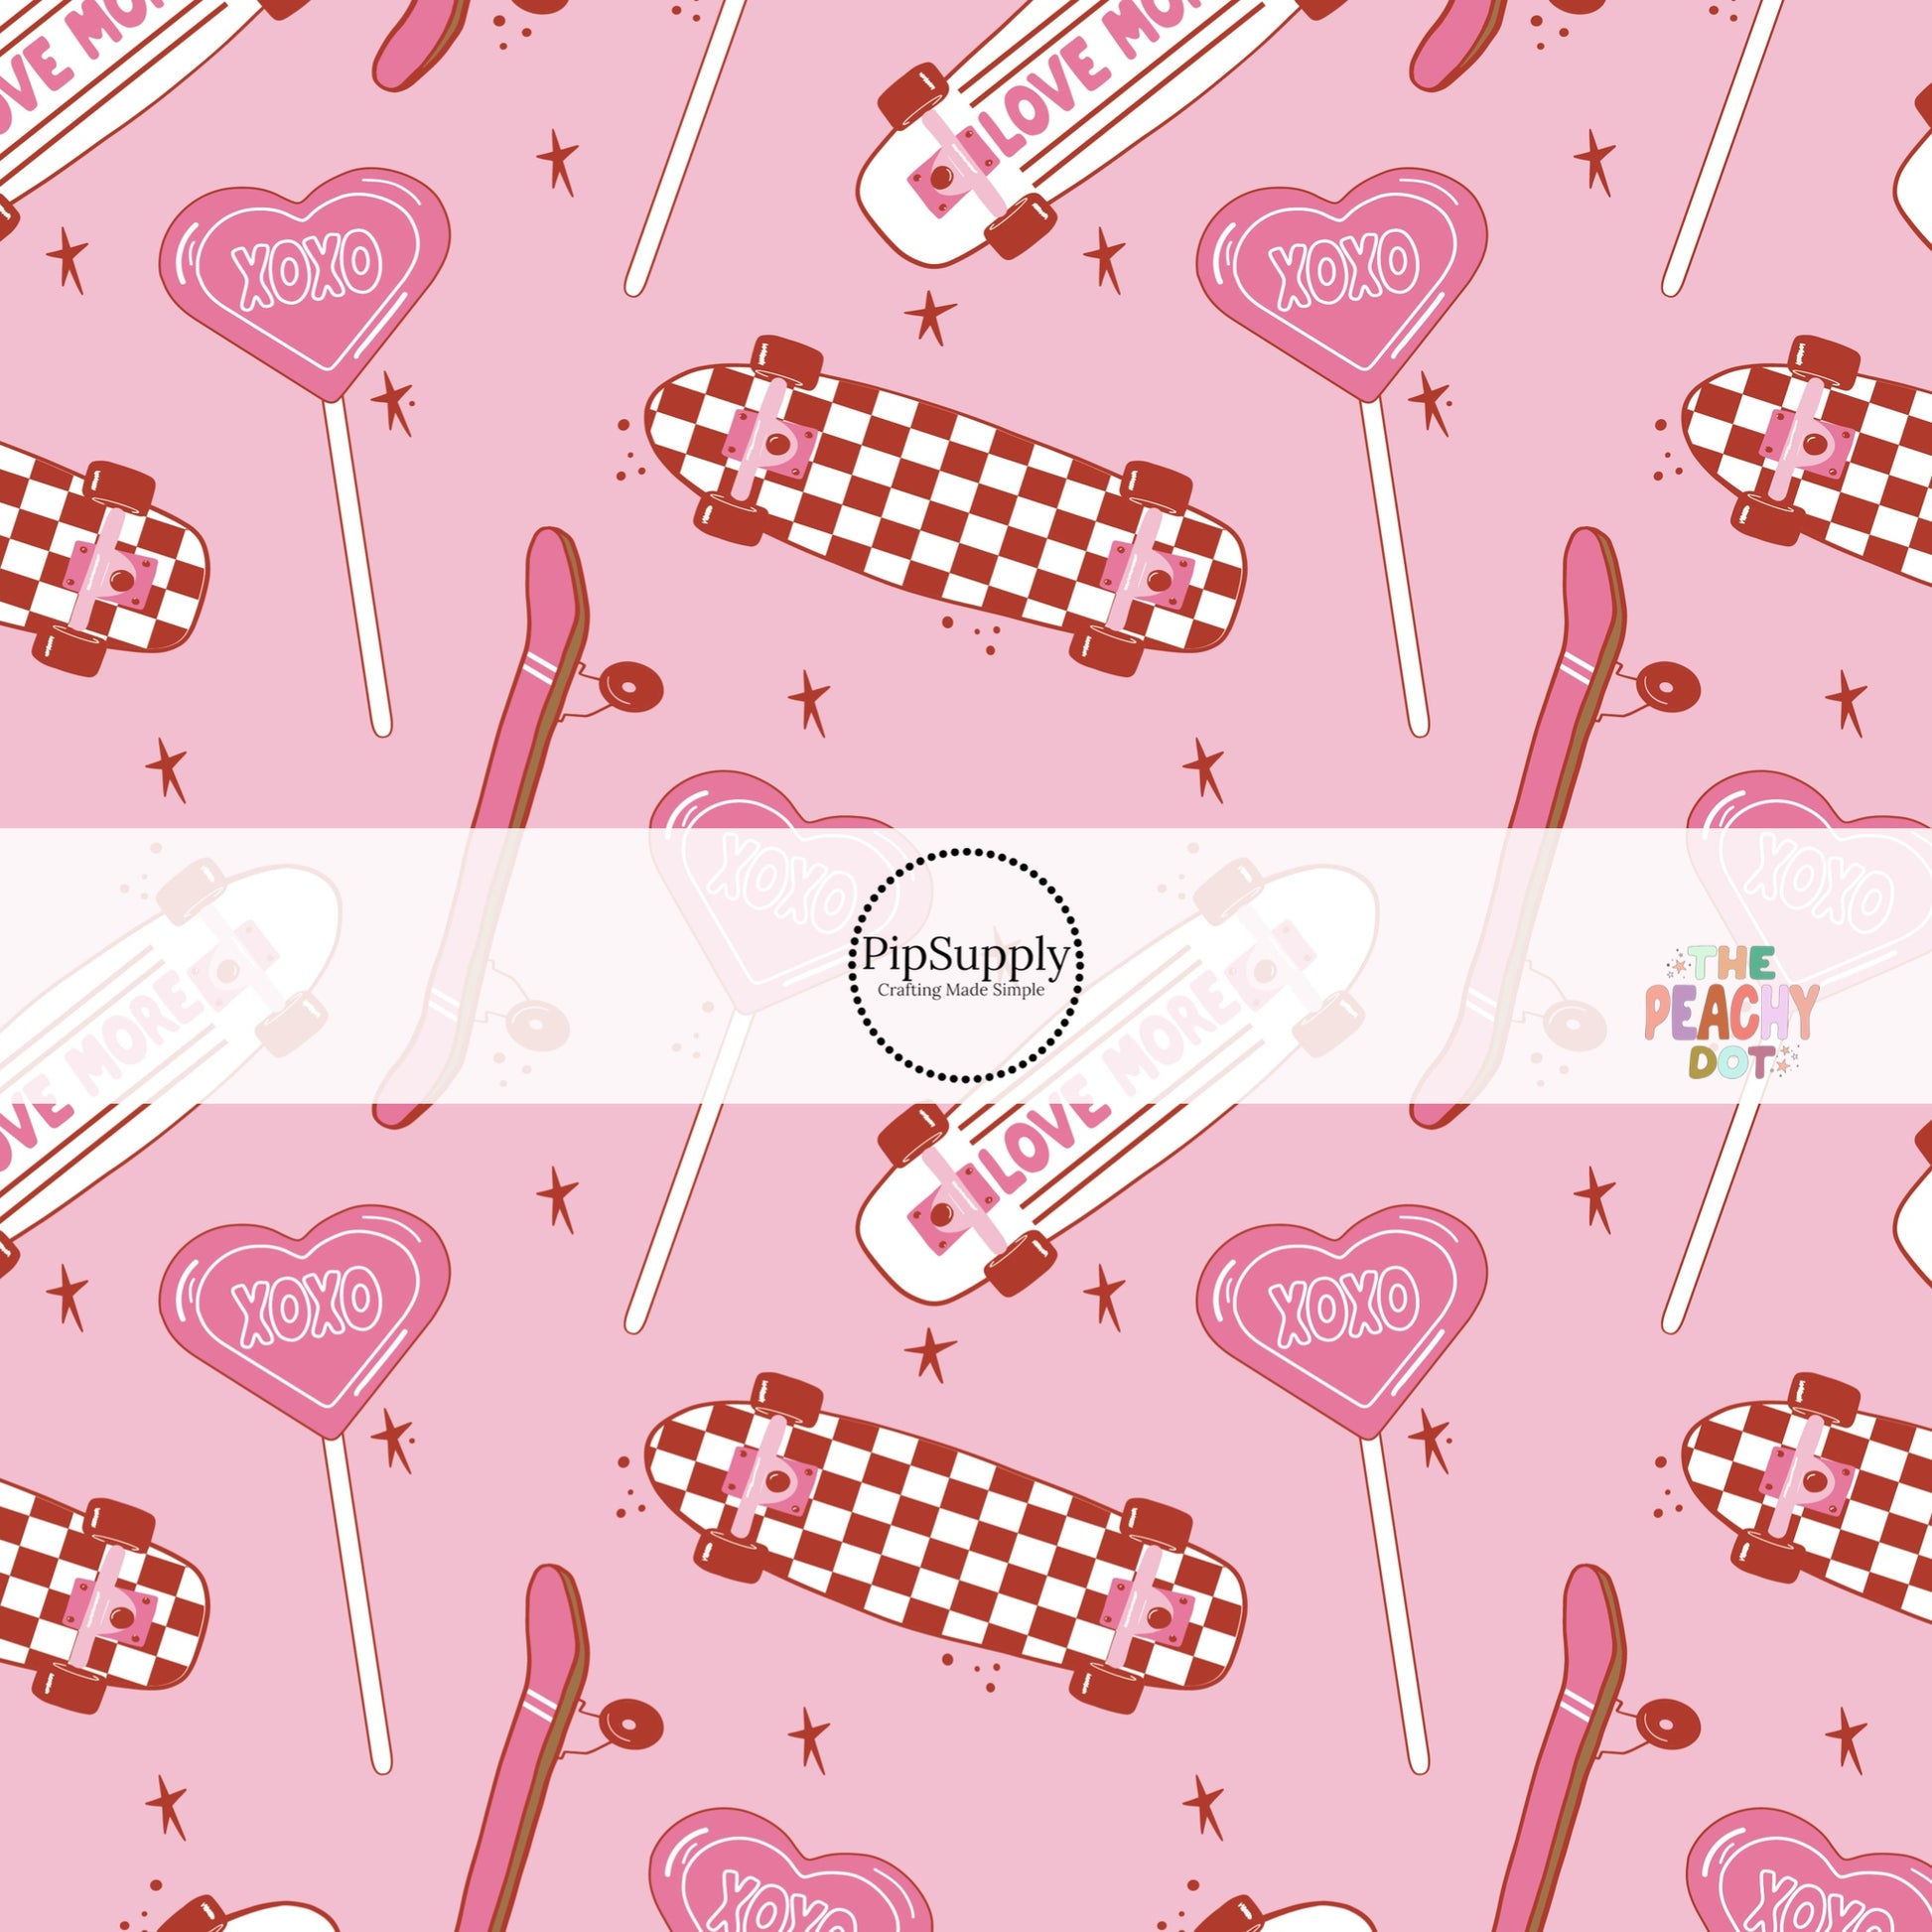 Pink fabric swatch with pink skateboards and red and white checkered skateboards - Fabric by the Yard 